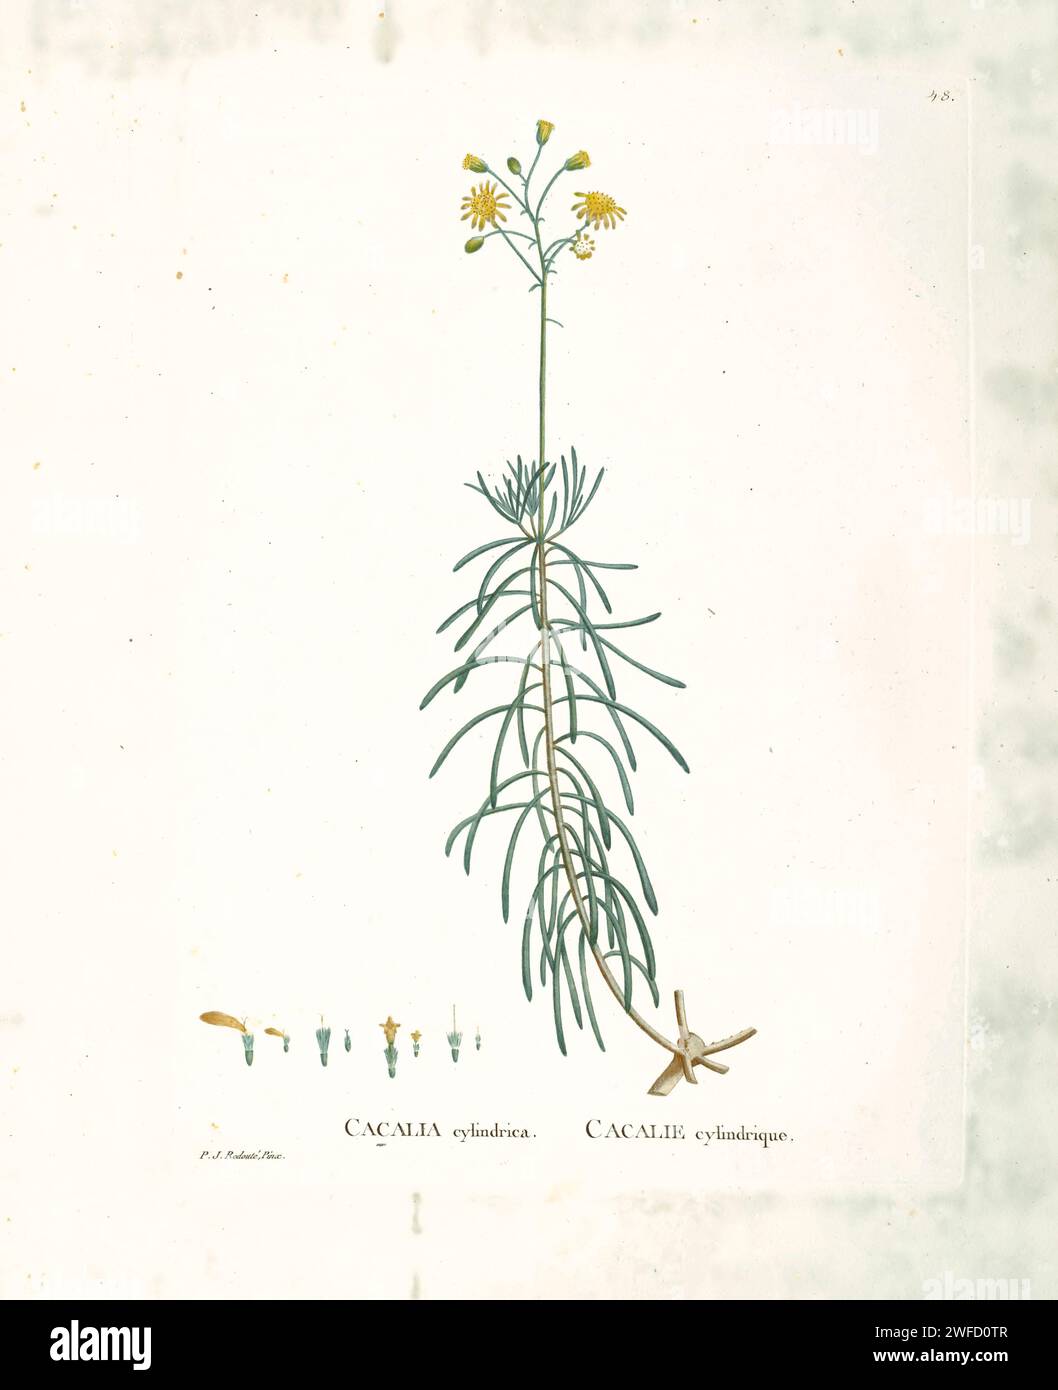 Othonna cylindrica Here As Cacalia cylindrica from History of Succulent Plants [Plantarum historia succulentarum / Histoire des plantes grasses] painted by Pierre-Joseph Redouté and described by Augustin Pyramus de Candolle Stock Photo